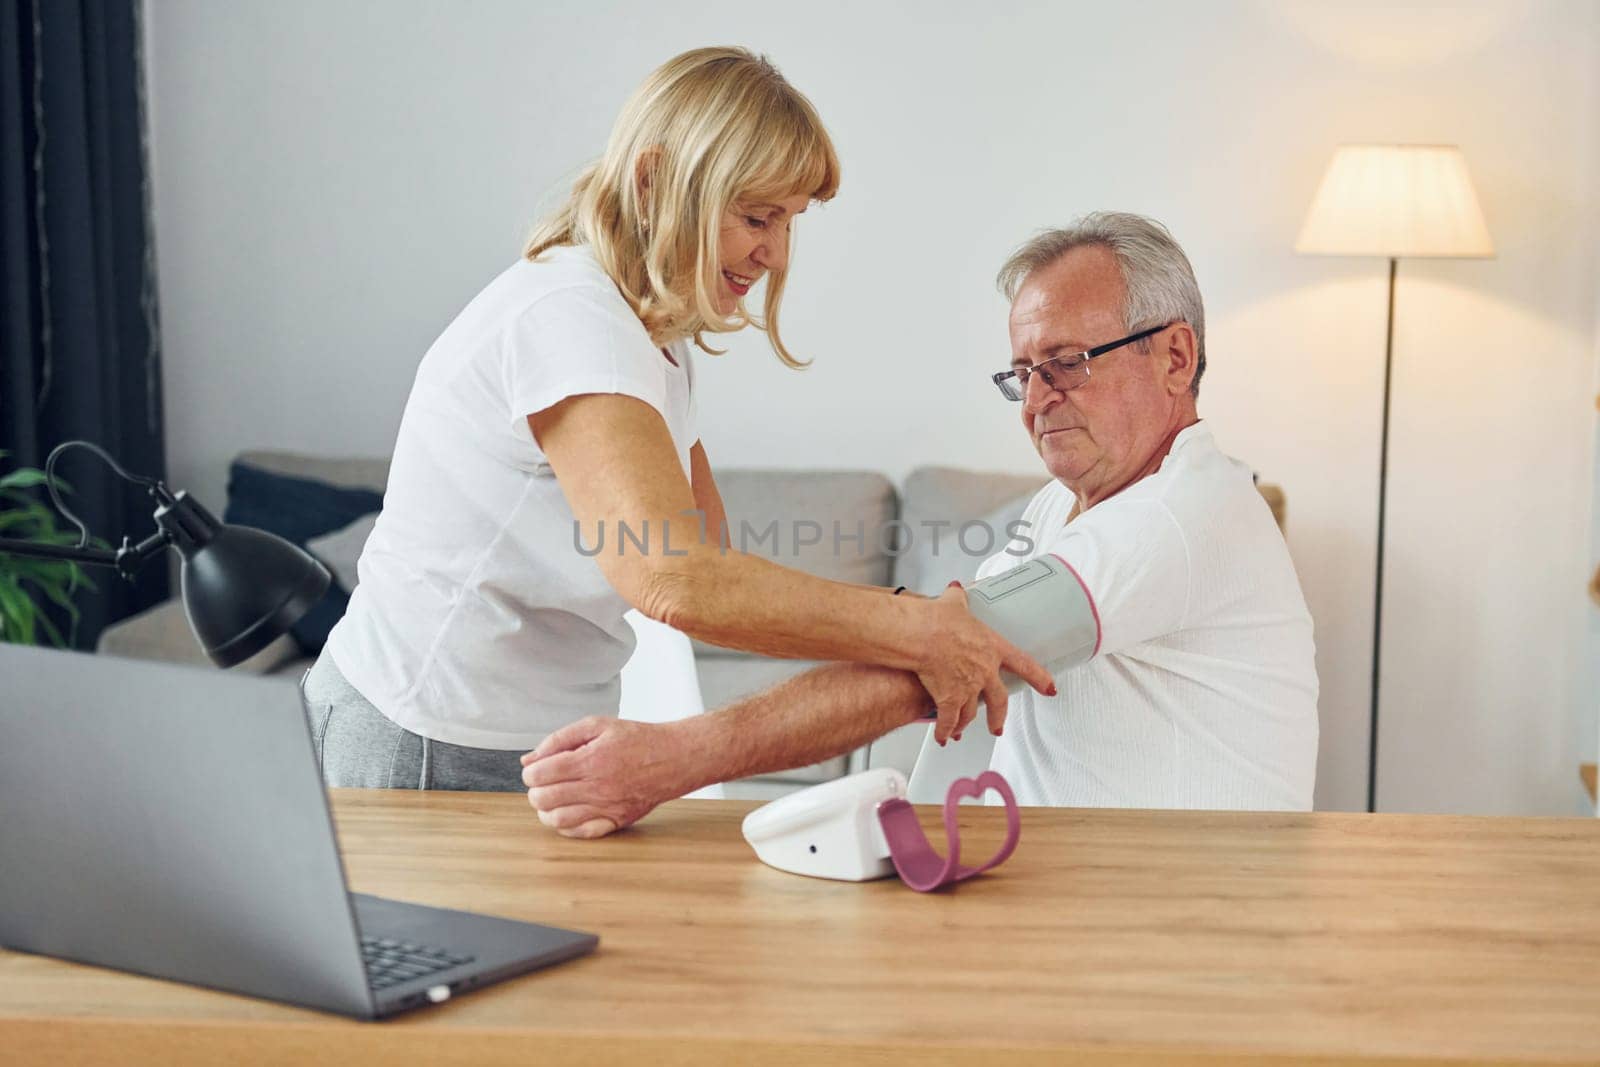 Wife measuring blood preasure of her husband. Senior man and woman is together at home.